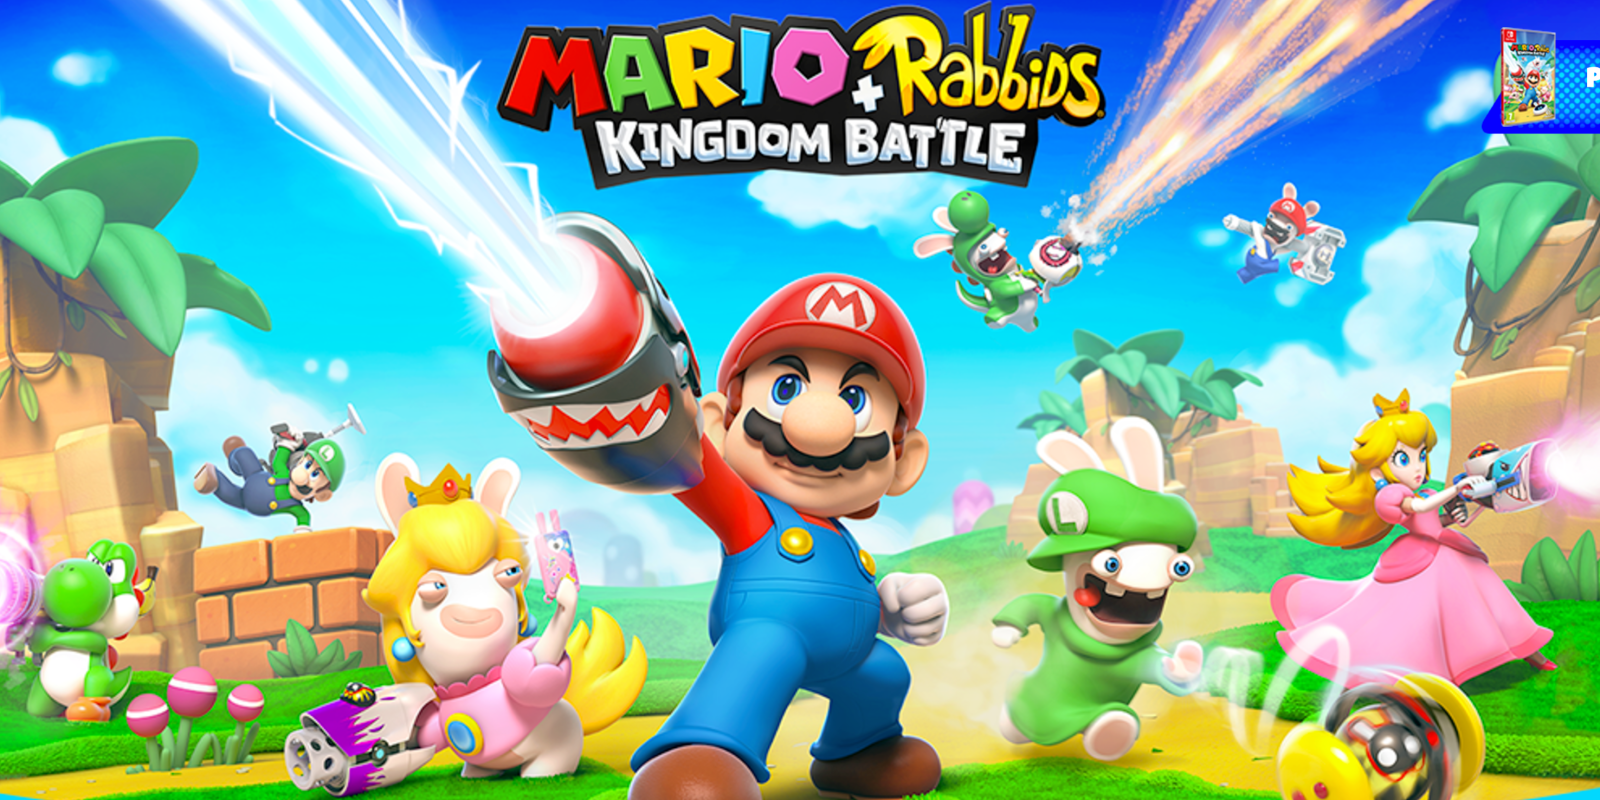 nintendo-drops-new-gameplay-trailer-for-mario-rabbids-kingdom-battle-video-9to5toys